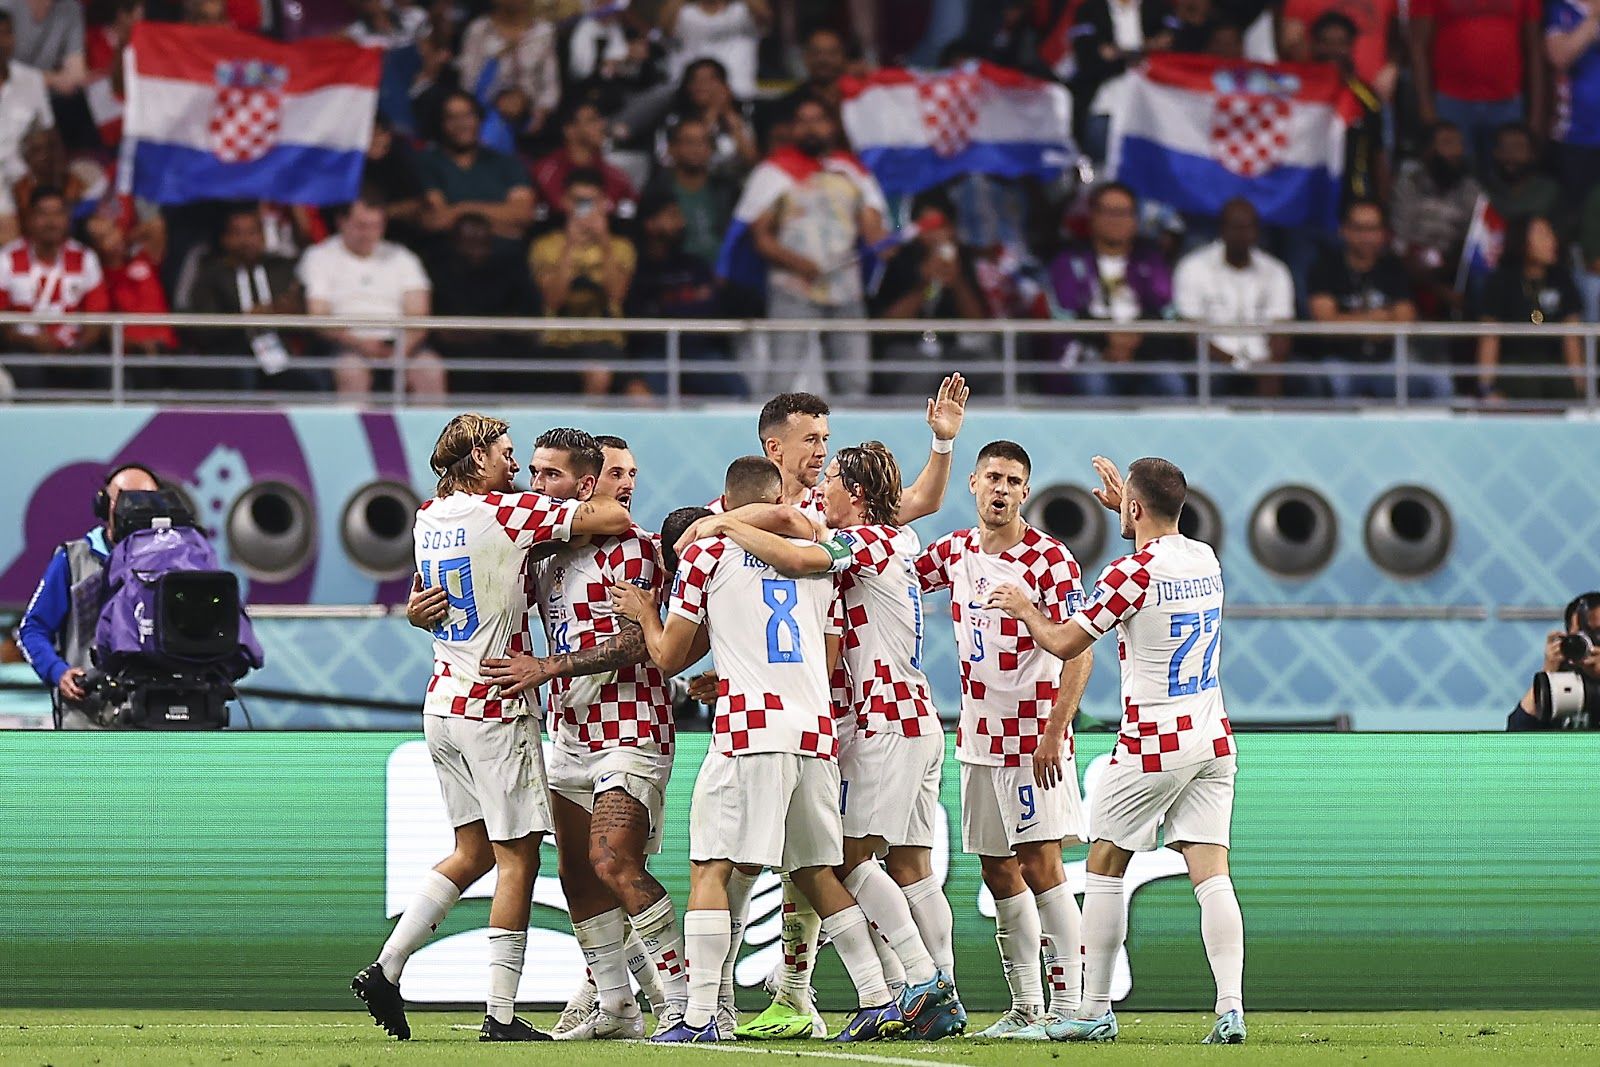 Japan vs Croatia, December 5: Head-to-Head Statistics, Line-ups, Prediction for the 2022 World Cup Match